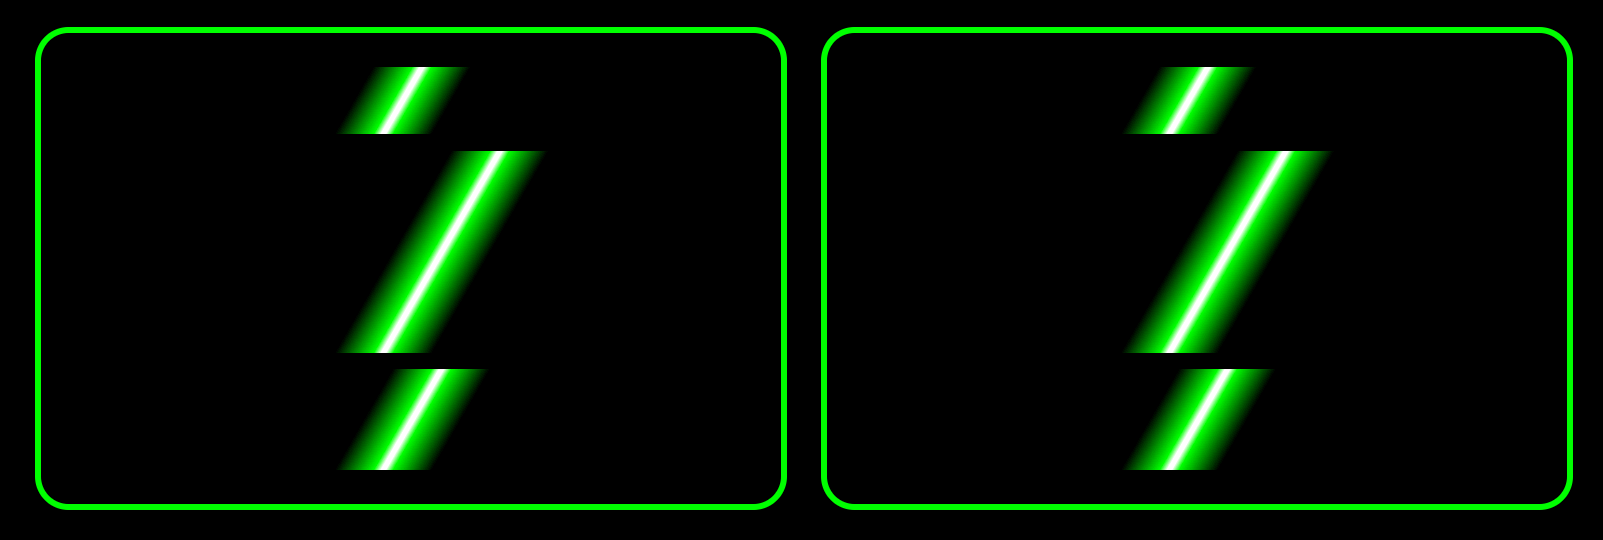 Green angled lines on a black background.